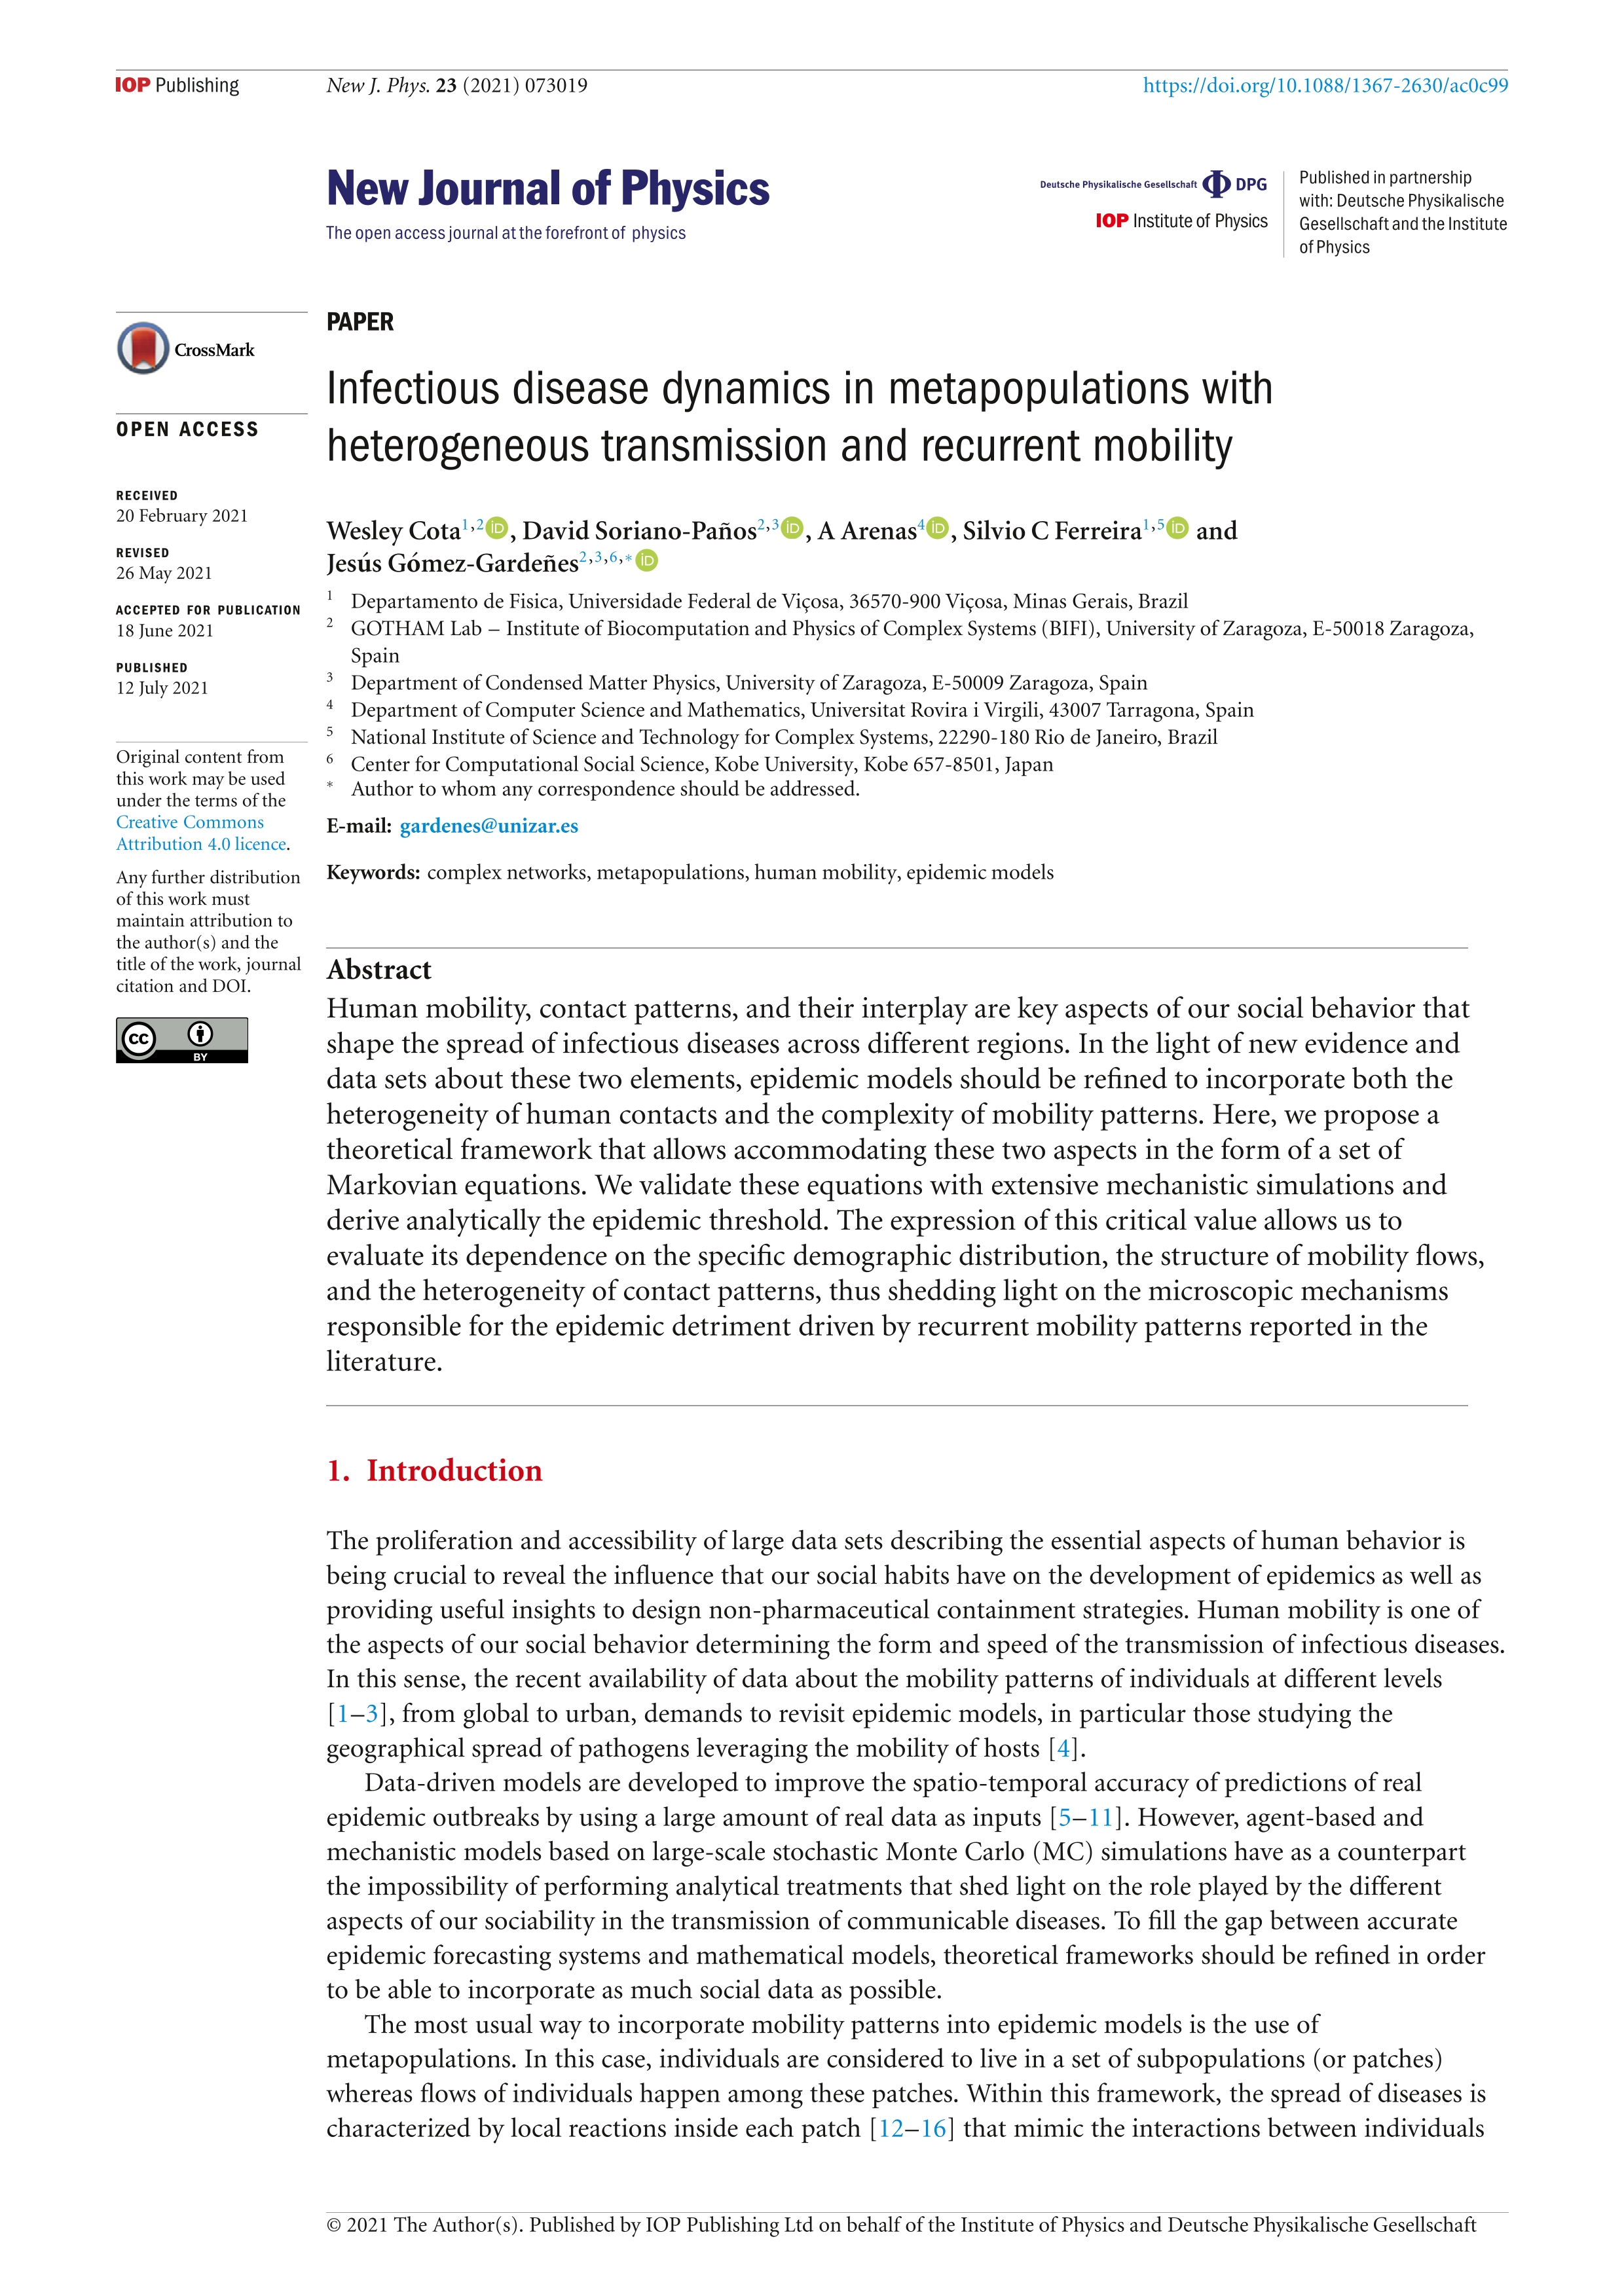 Infectious disease dynamics in metapopulations with heterogeneous transmission and recurrent mobility